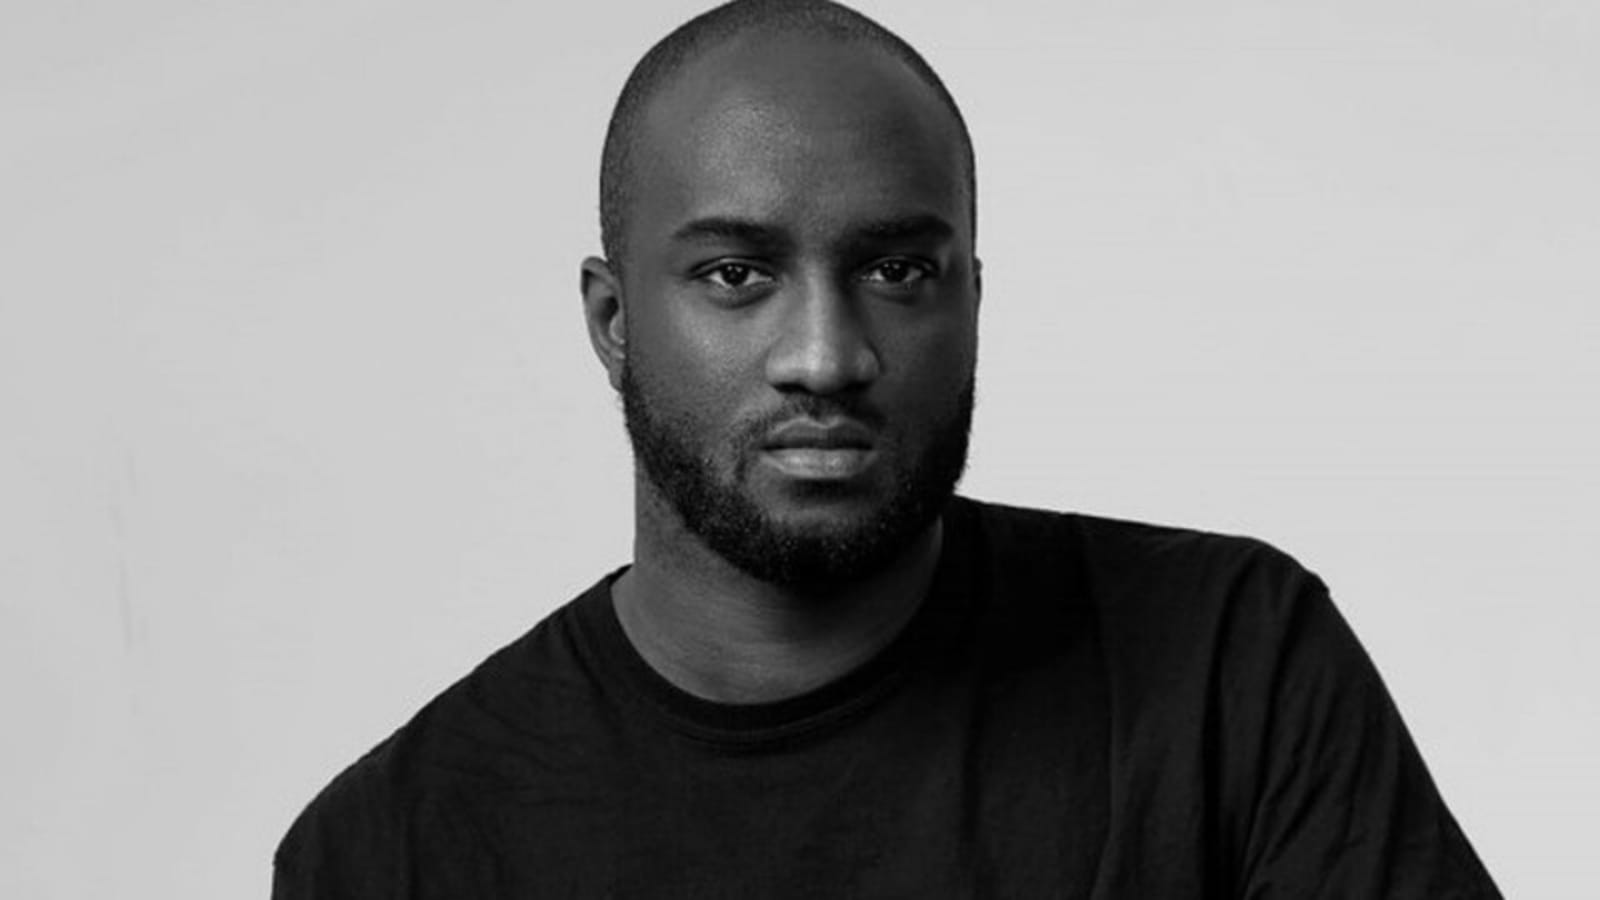 Virgil Abloh's legacy at Louis Vuitton will live on forever